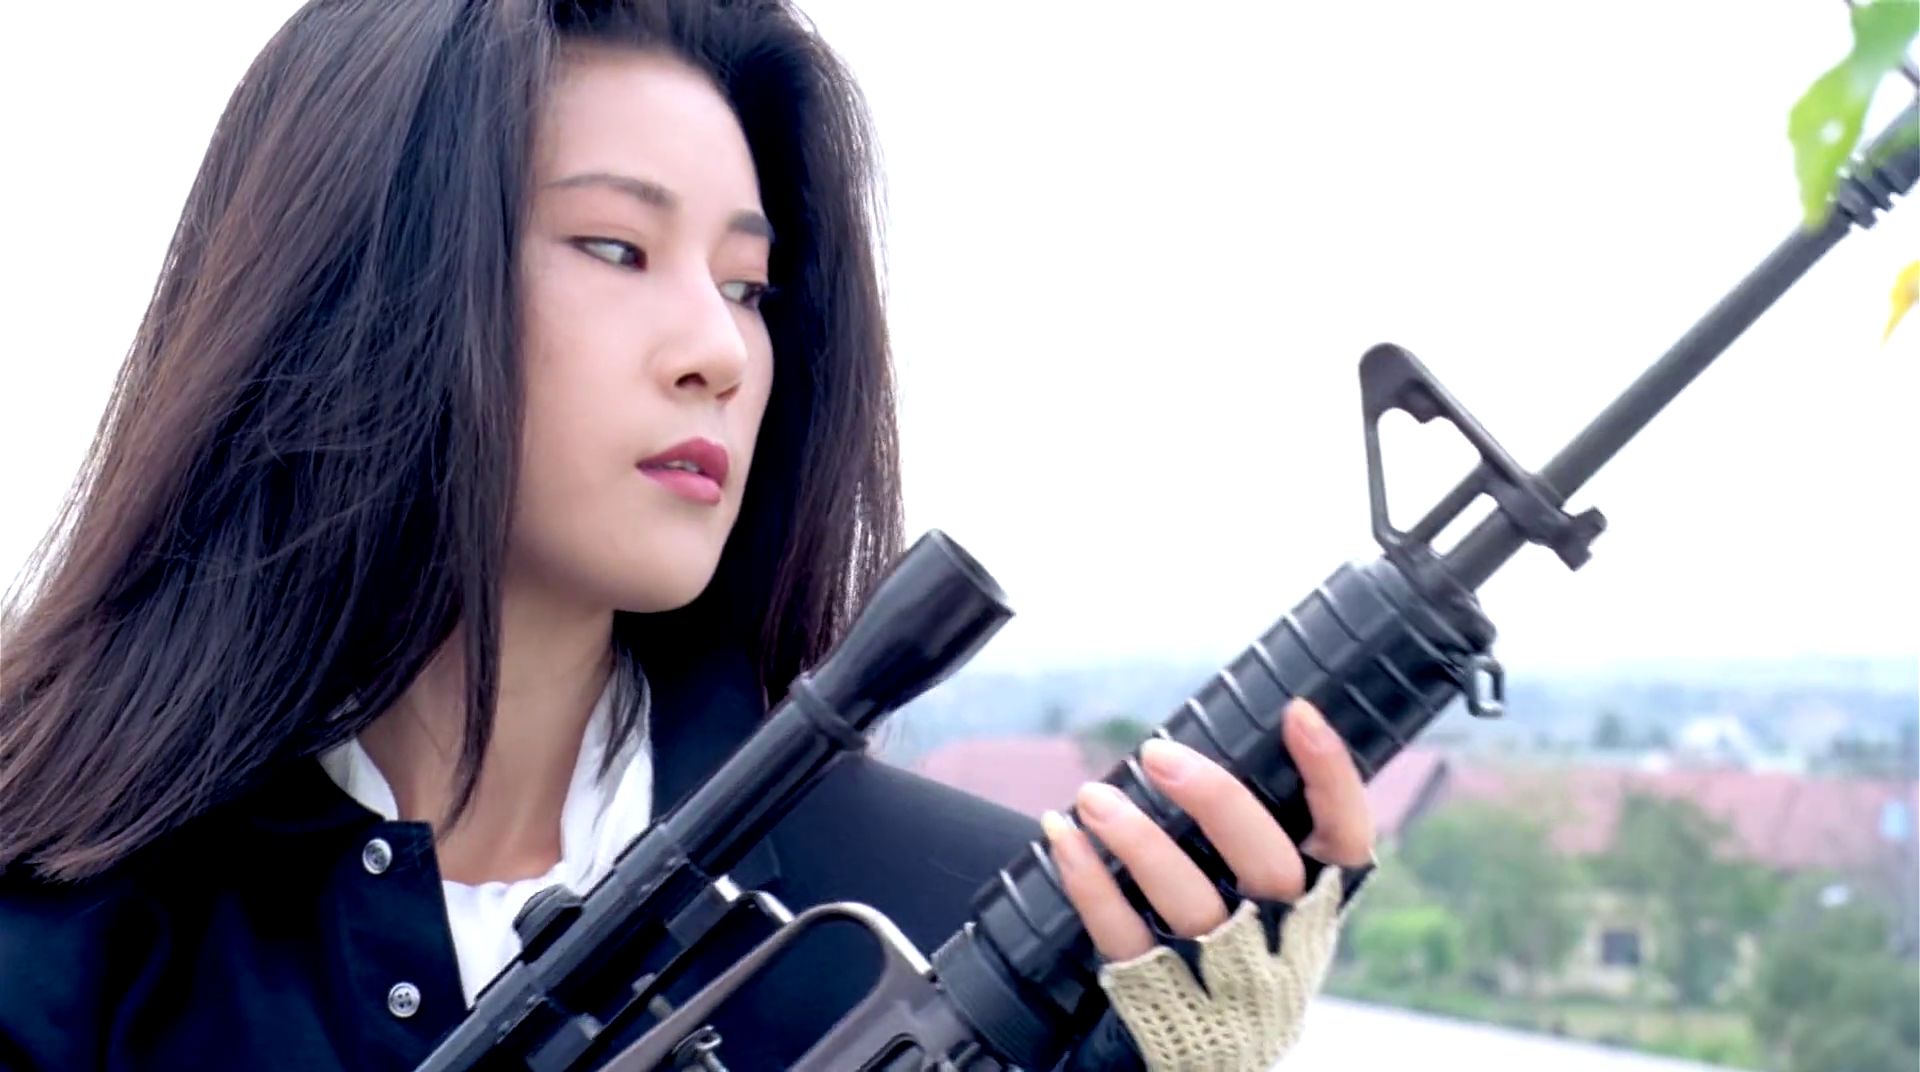 chrichtonsworld.com | Honest film reviews: Review Lethal Panther a.k.a.  Jing tian long hu bao (1990): Remarkable mix of Girls with Guns, Heroic  Bloodshed and Catergory III!